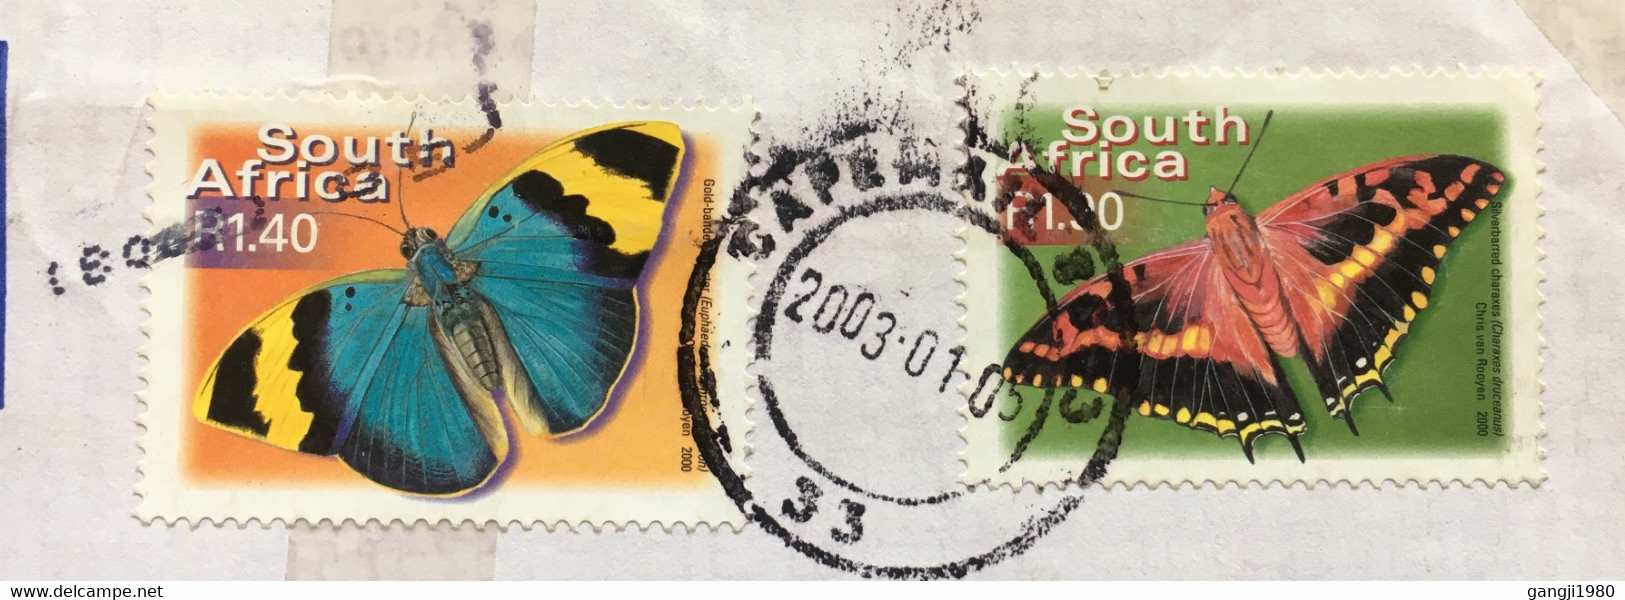 SOUTH AFRICA 2003, AIRMAIL COVER 2 DIFFERENT BUTTERFLY STAMPS ,CAPETOWN CITY TO INDIA - Storia Postale